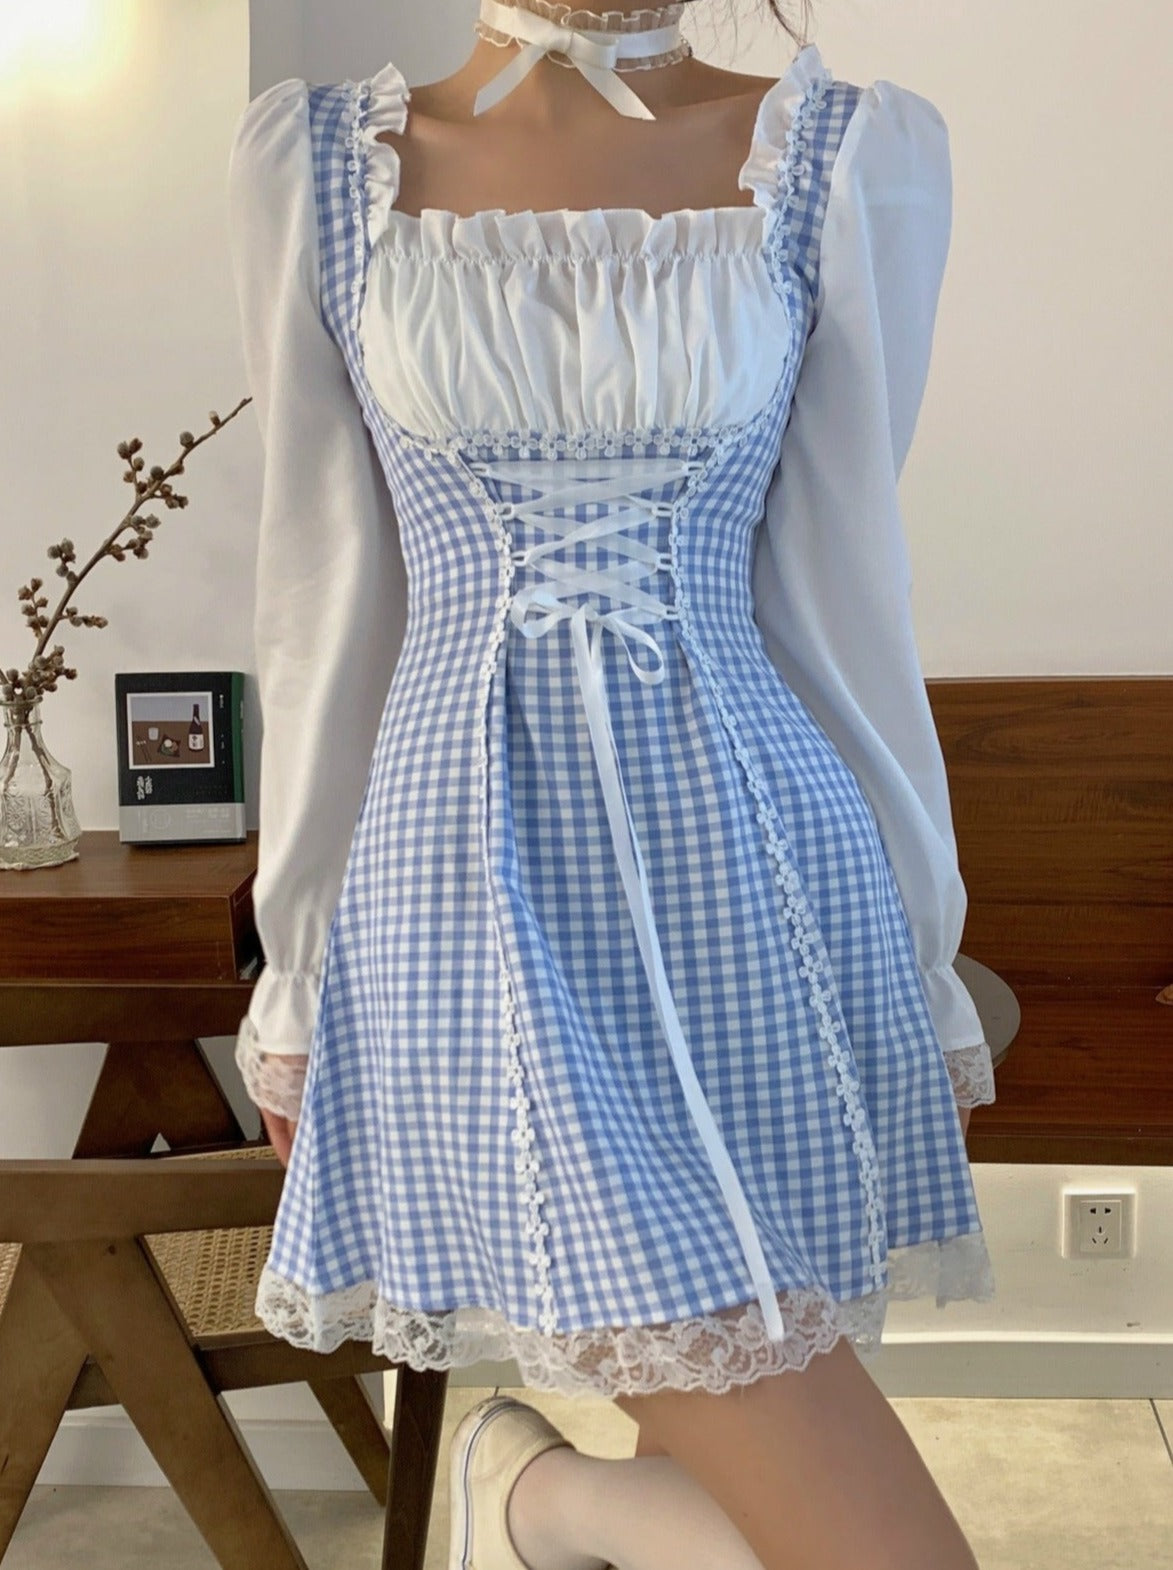 Frillsque Air Neck Check Lace Up French dress